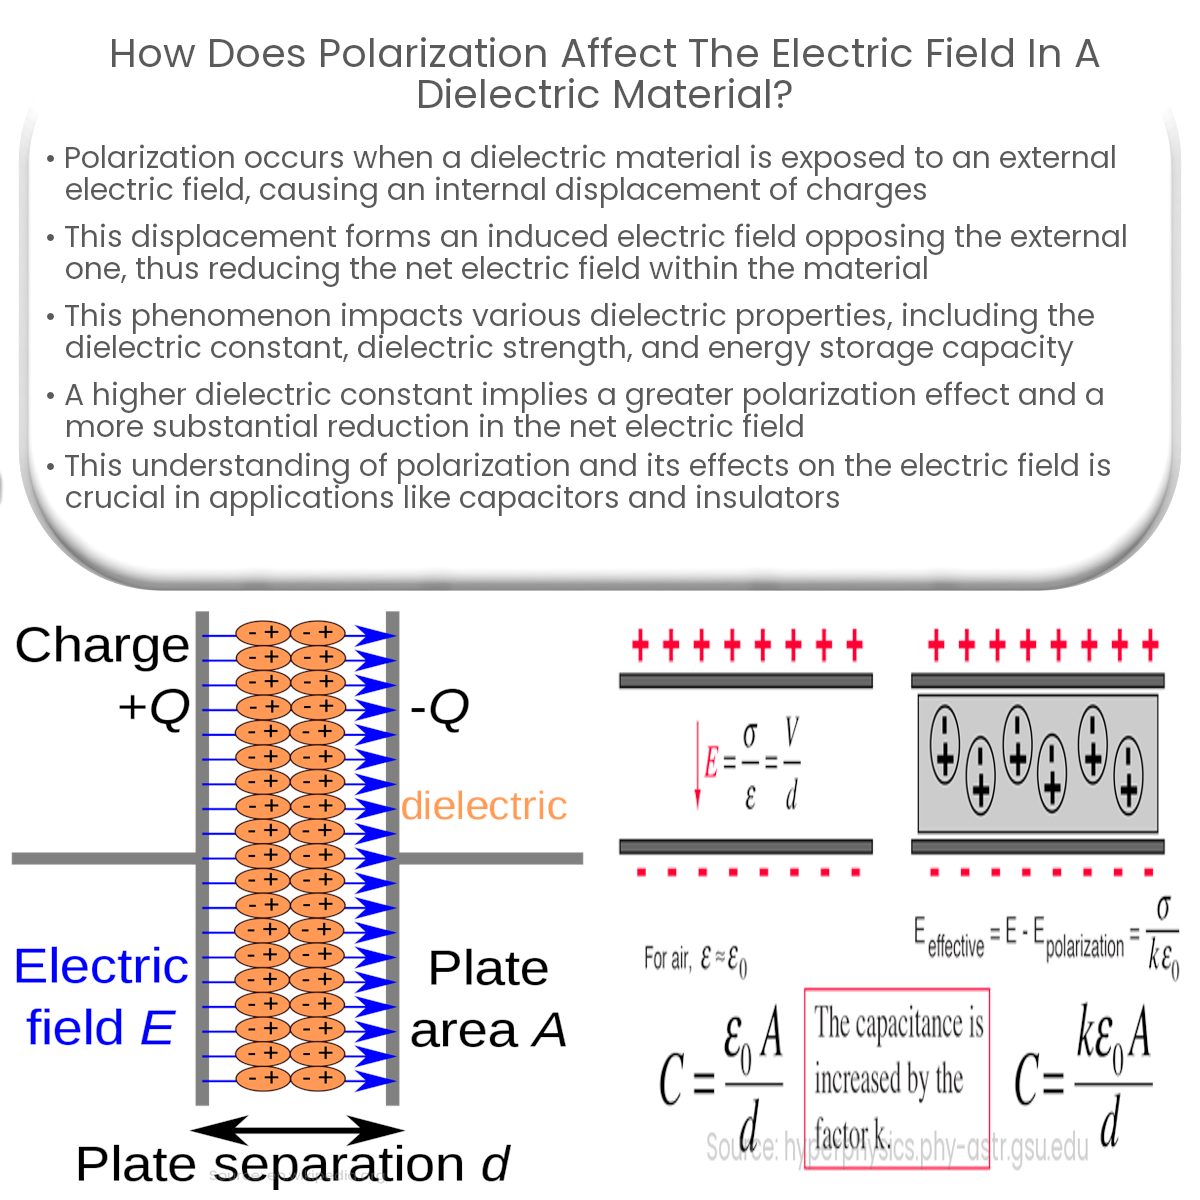 How does polarization affect the electric field in a dielectric material?